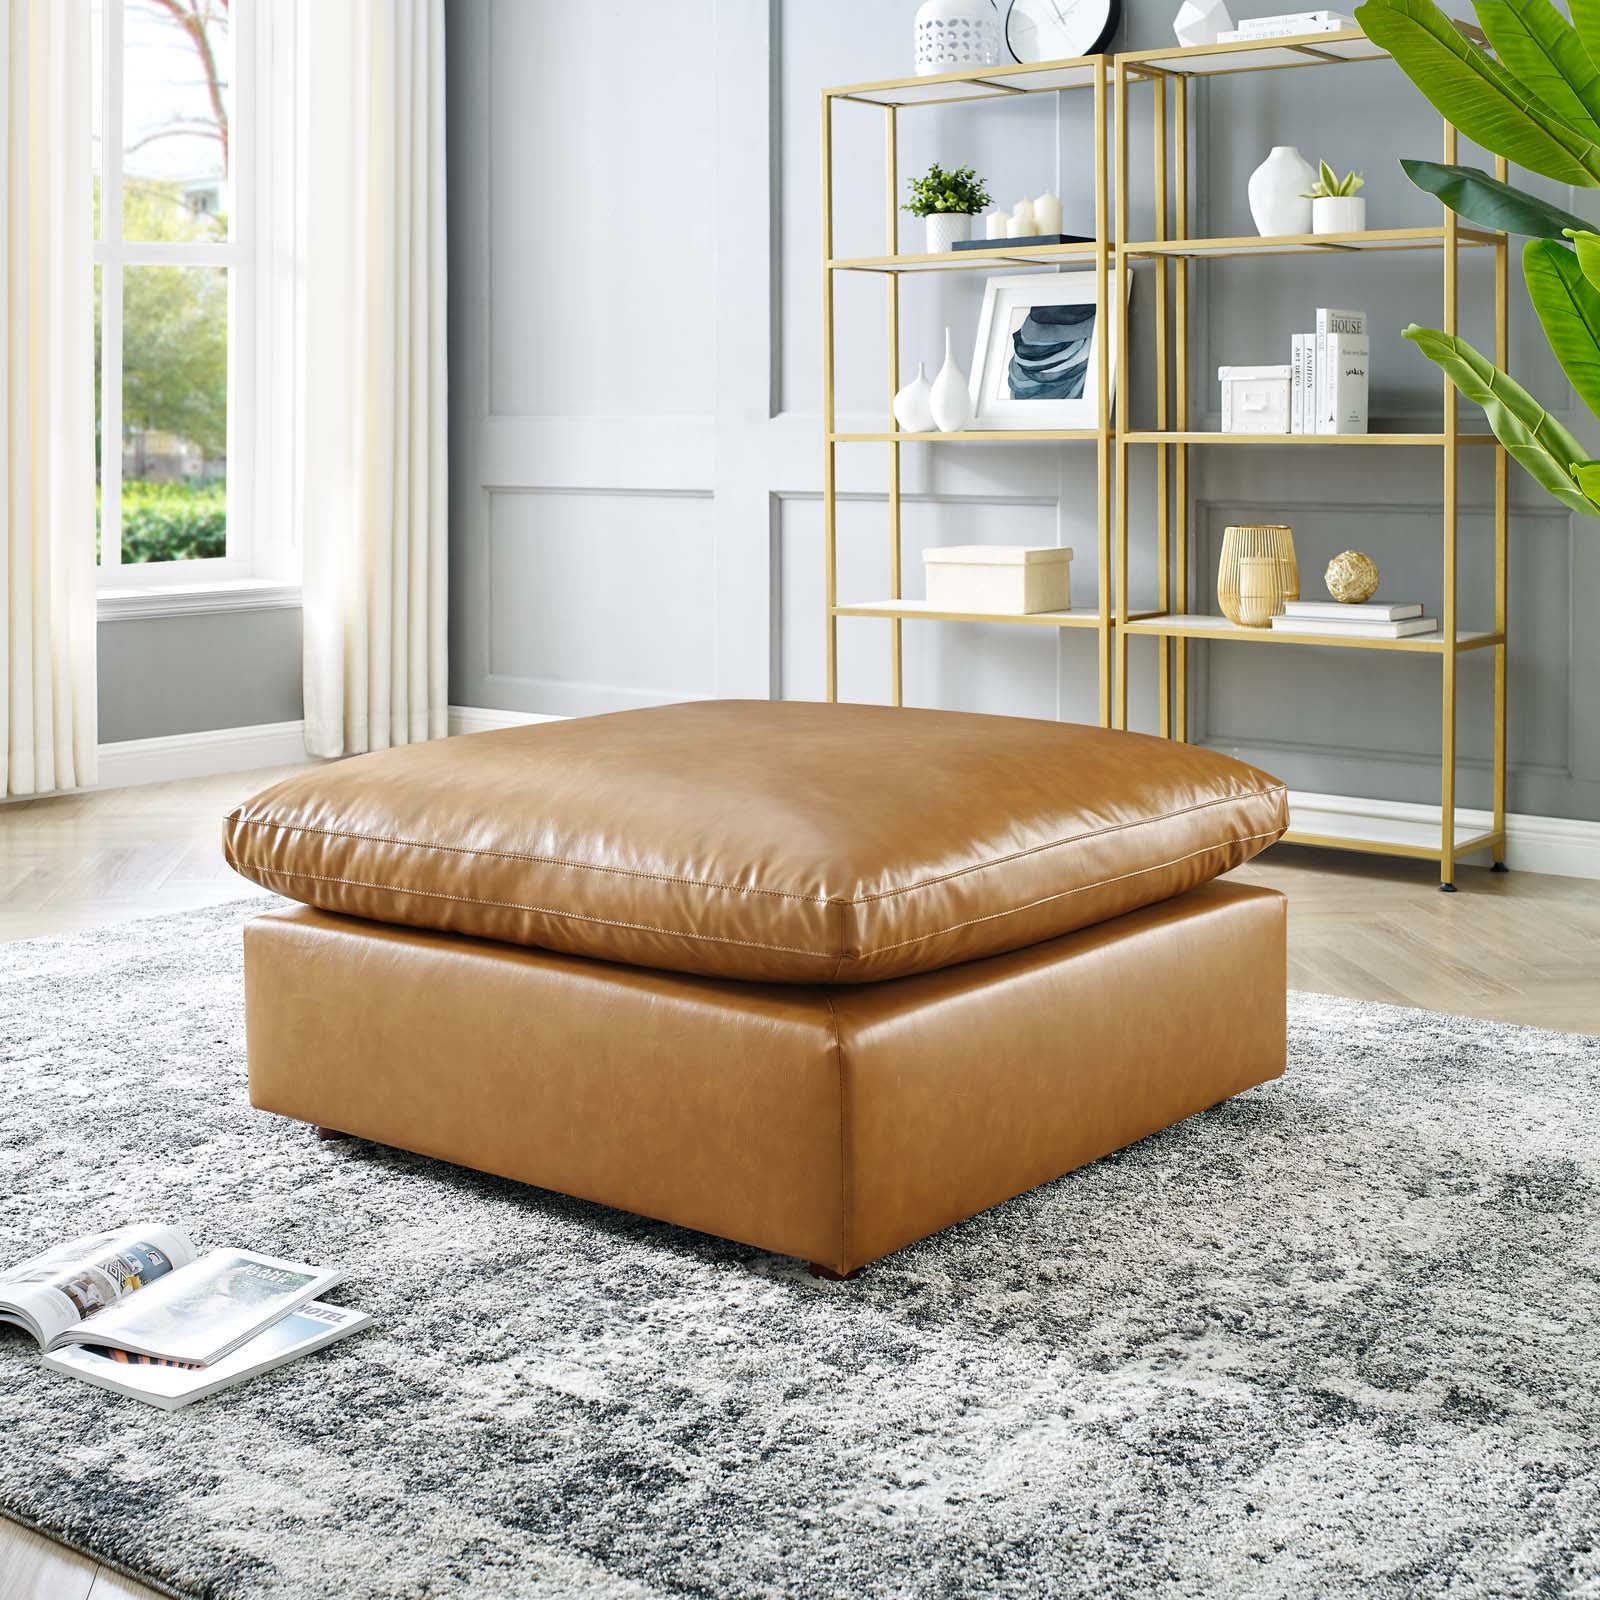 Commix Down Filled Overstuffed Vegan Leather Ottoman